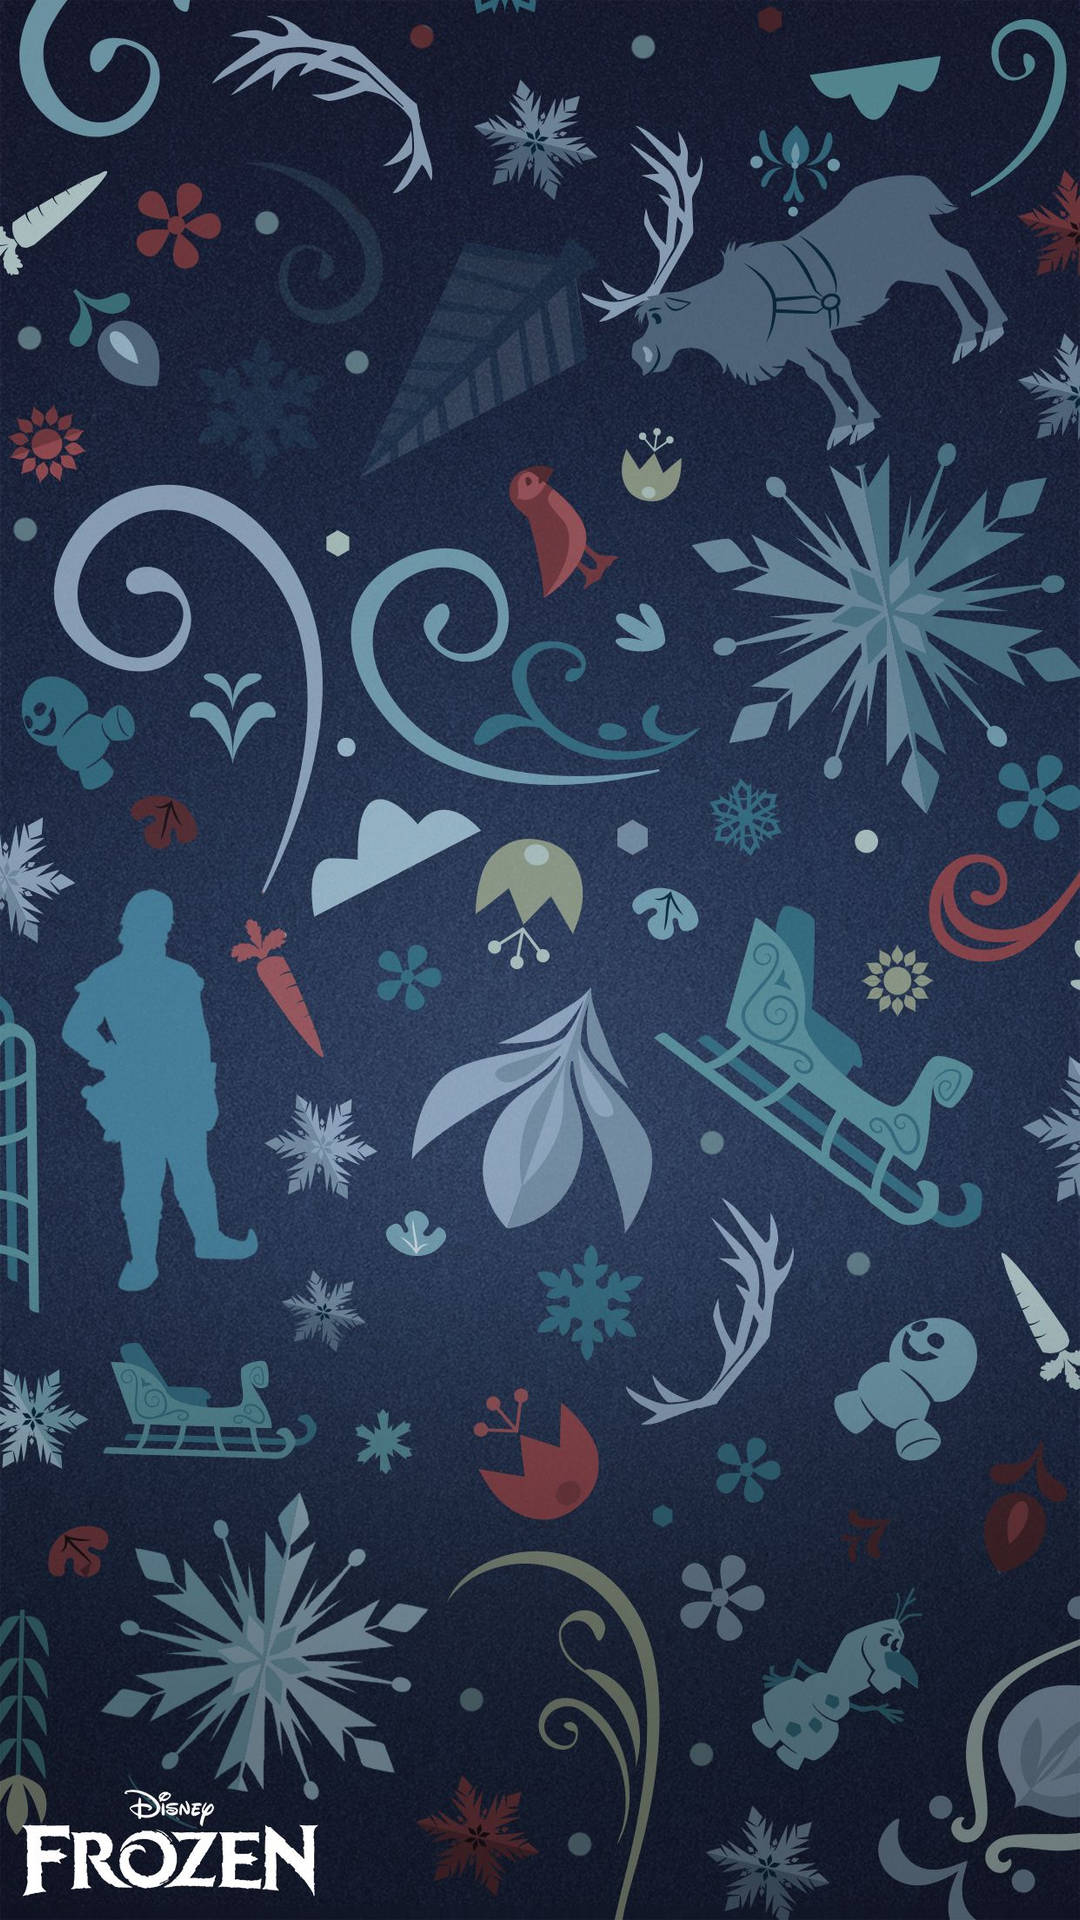 Anna embarks on a journey of adventure with the help of Kristoff Wallpaper